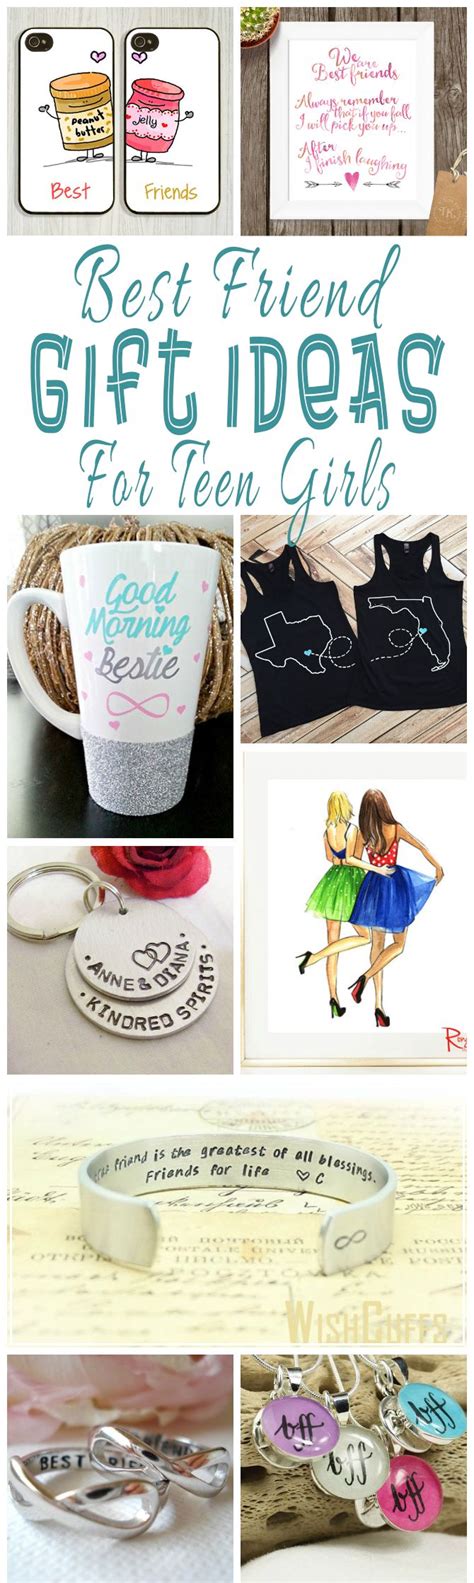 We've gathered 30 homemade birthday gifts for you to pick and choose from! Best Friend Gift Ideas For Teens | Best friend gifts ...